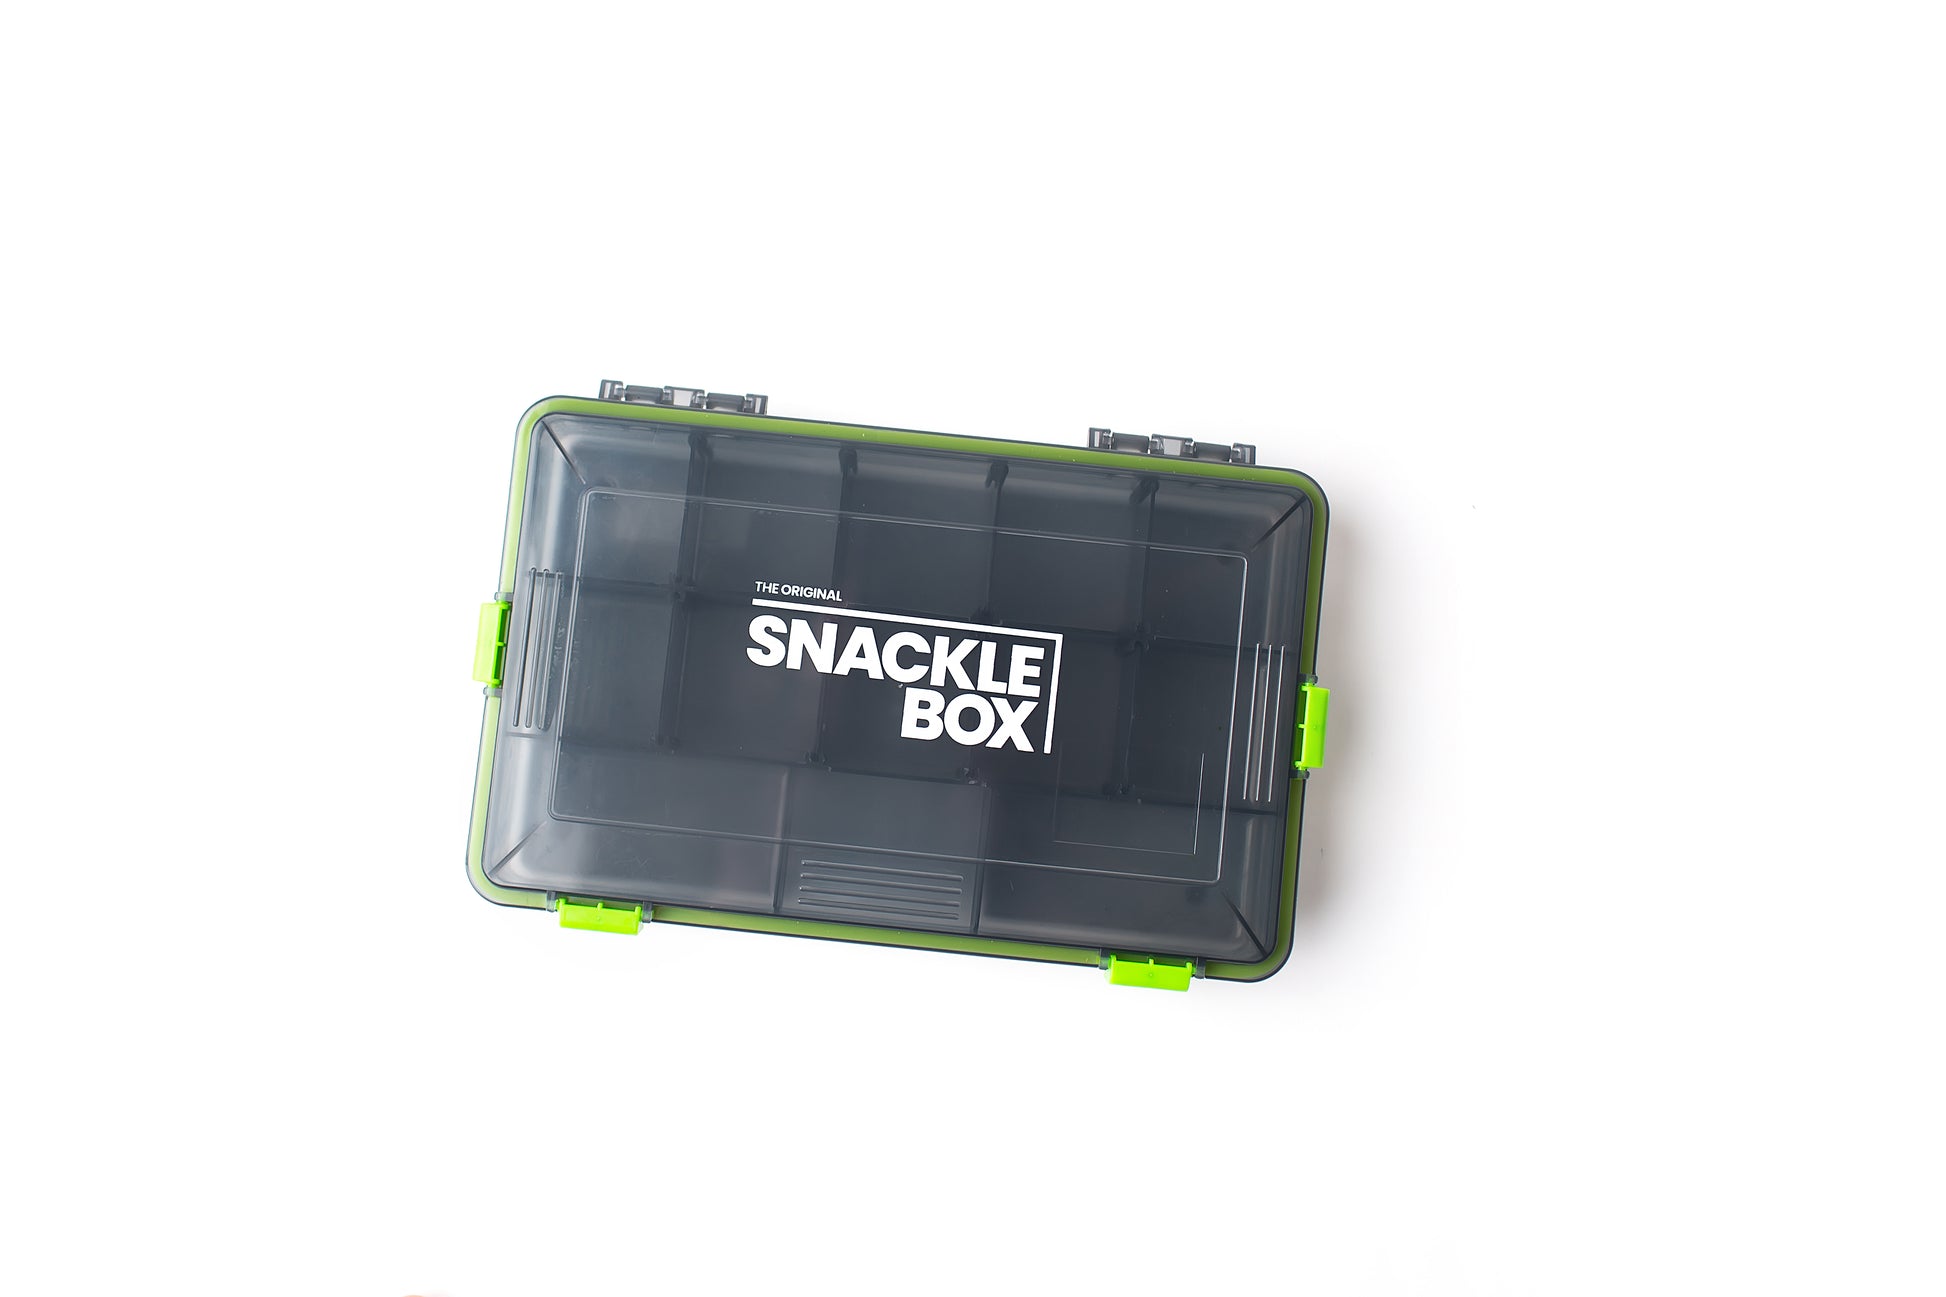 The Official Snackle Box